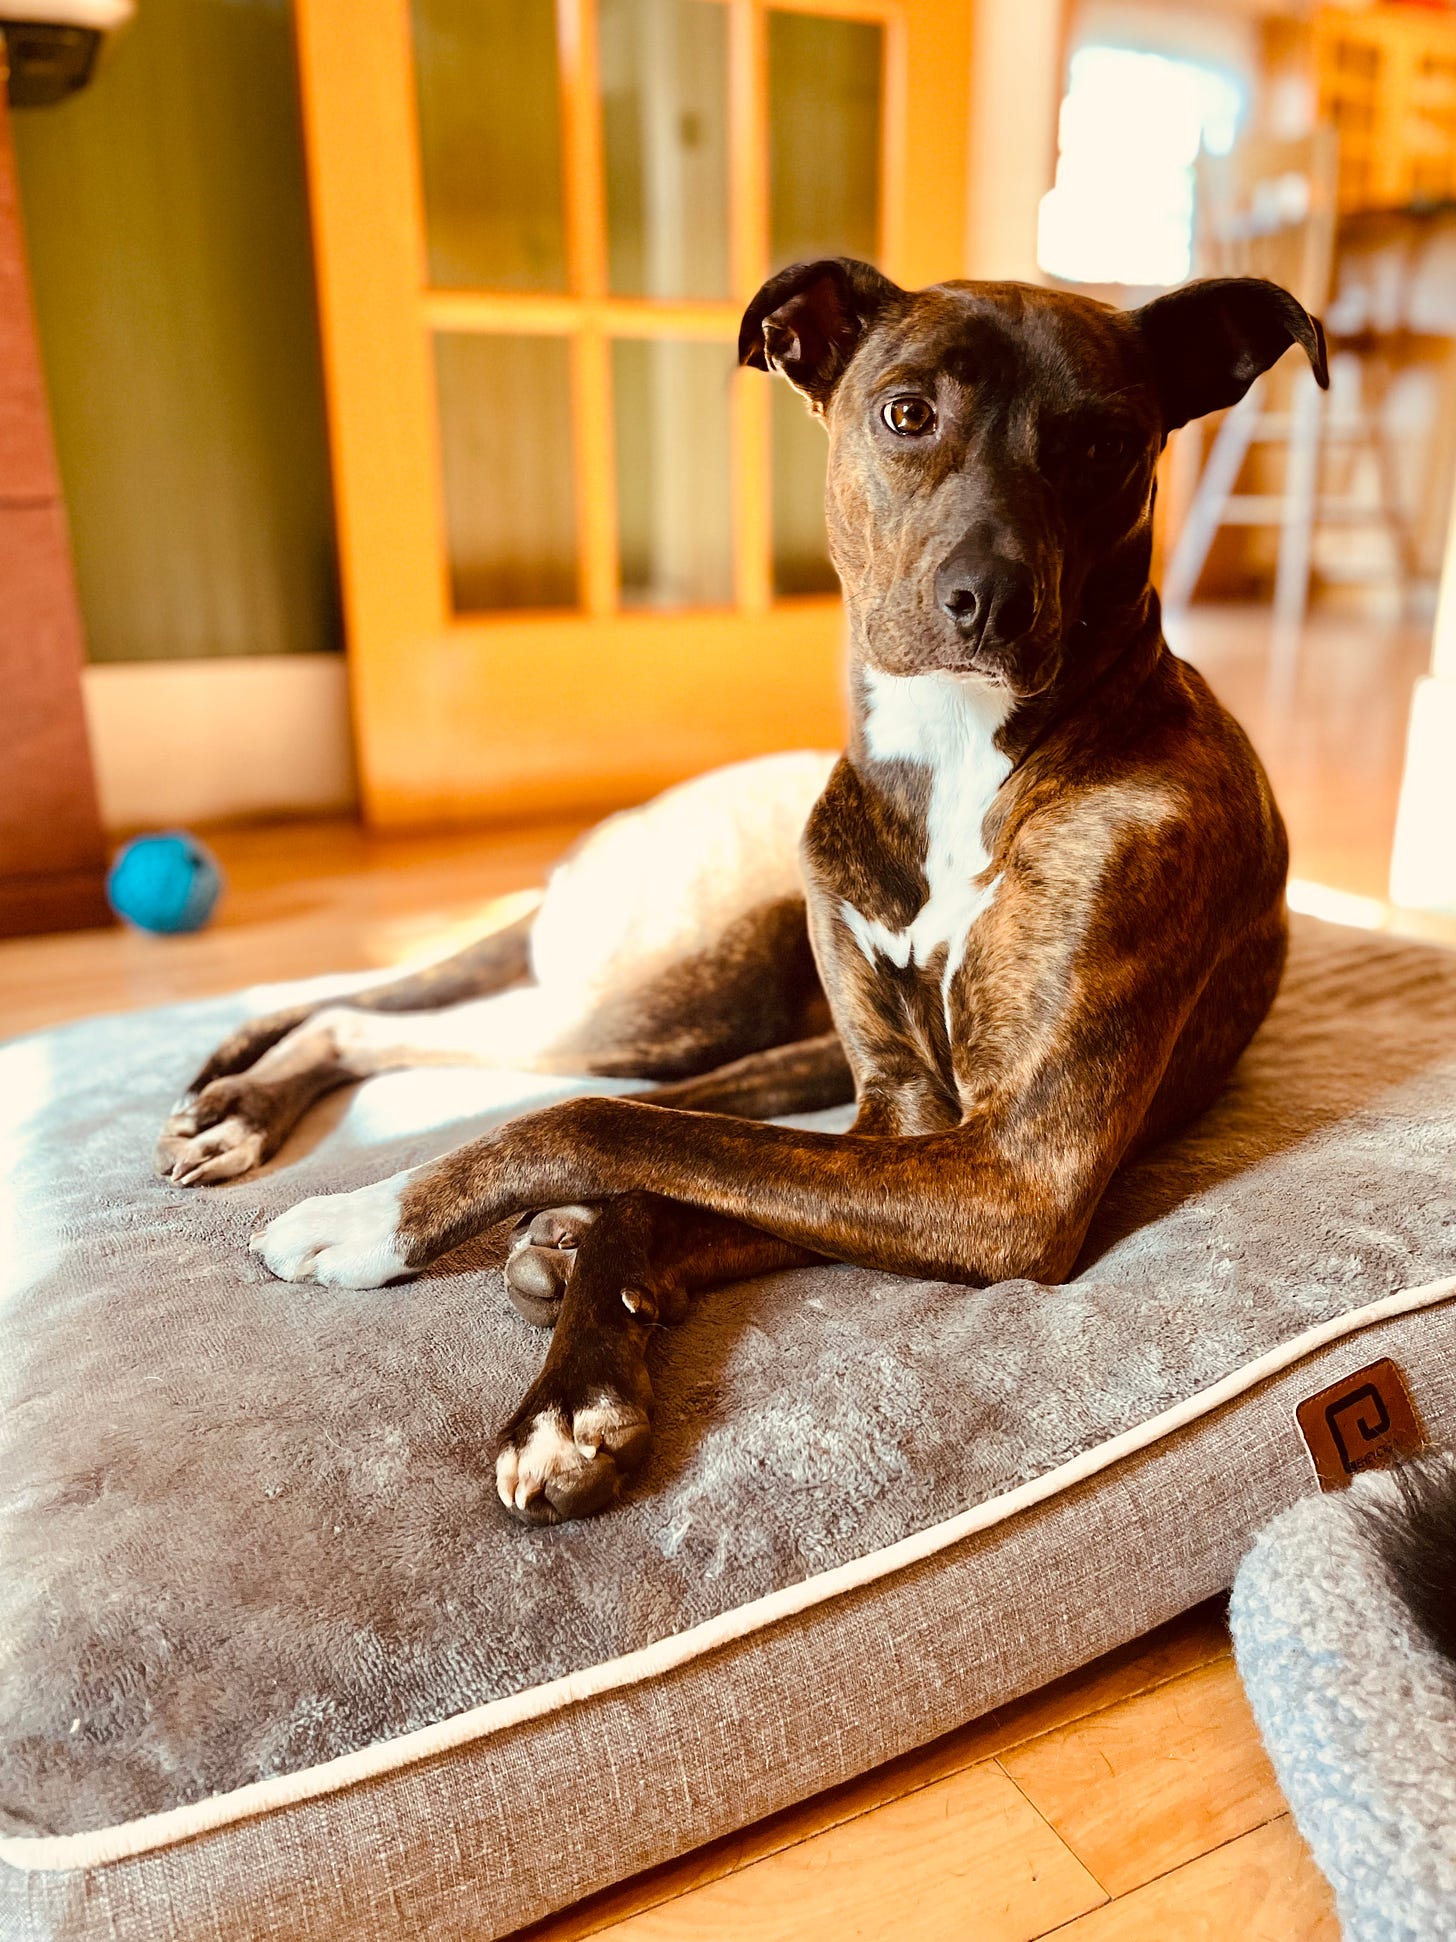 Dog on dog bed with her paws crossed looking concerned